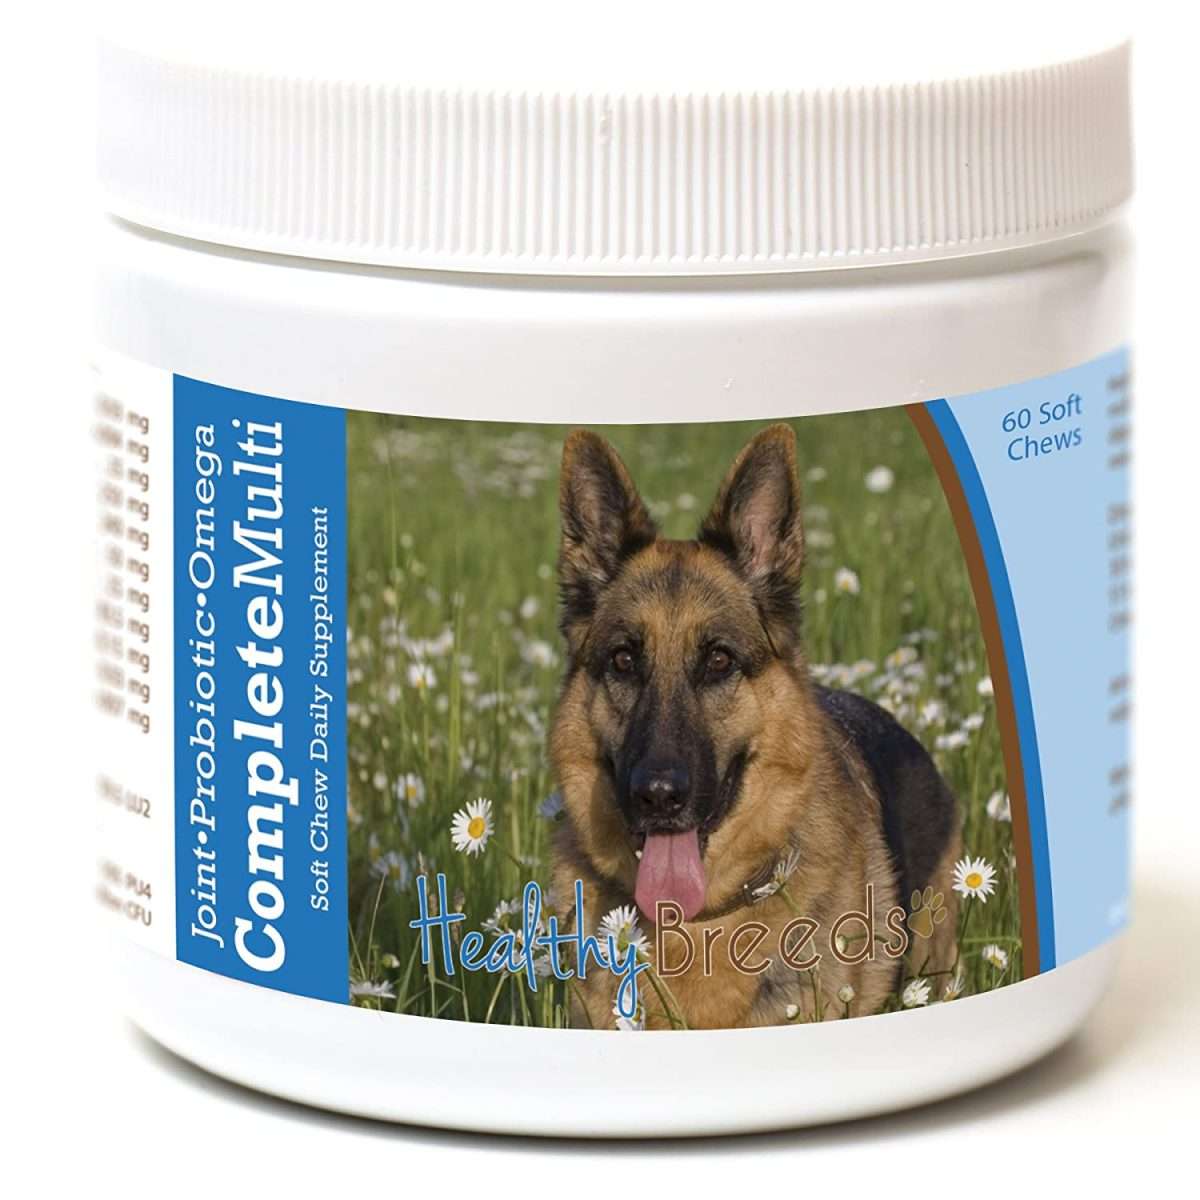 Amazon.com : Healthy Breeds Complete Dog Multivitamin and Supplement ...